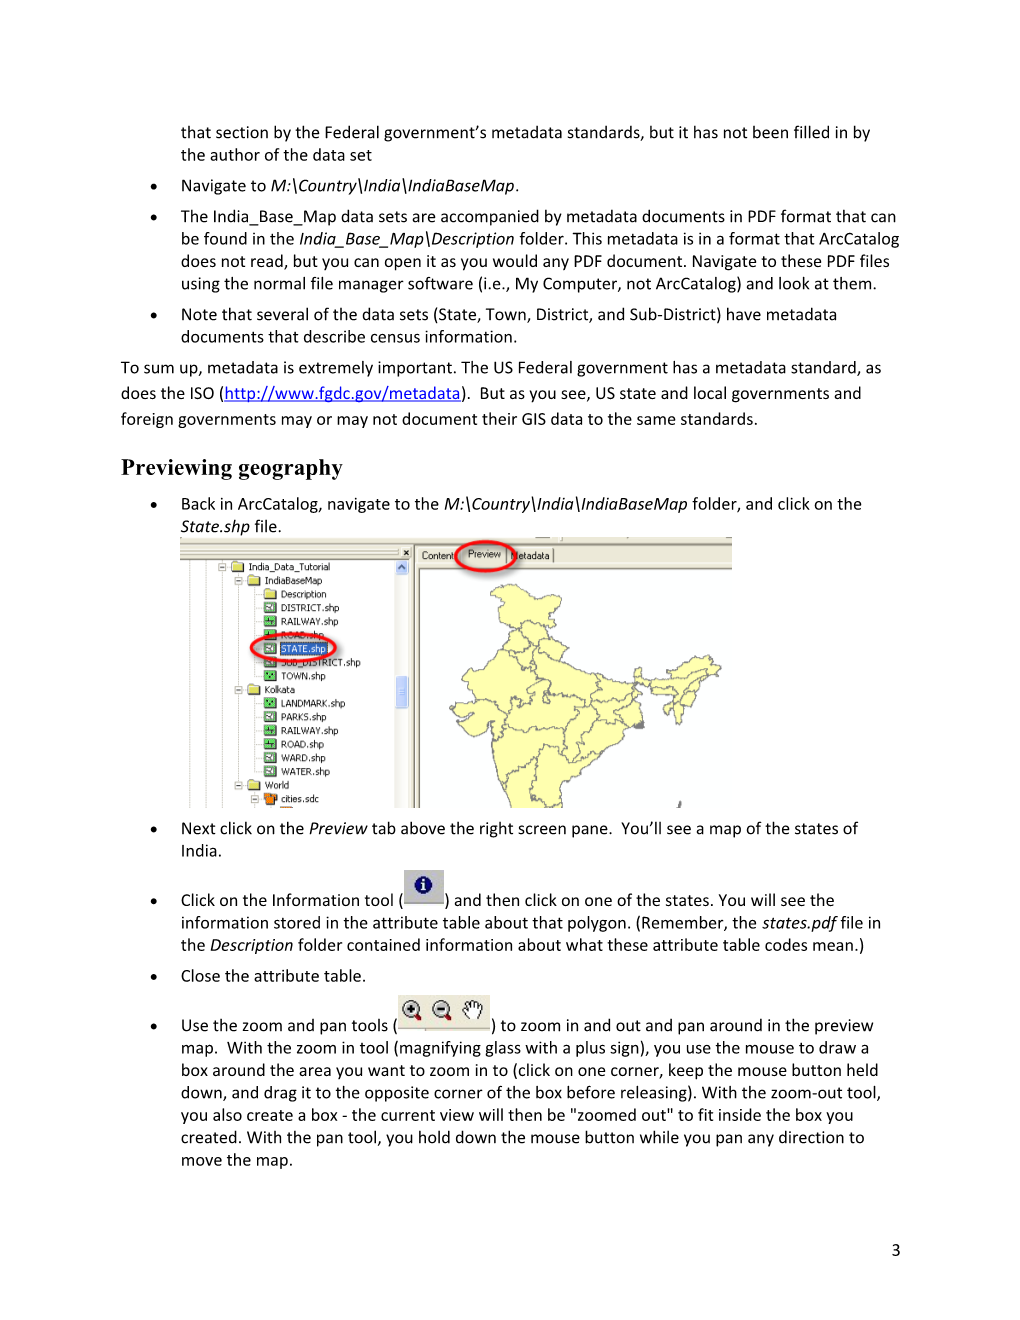 Arcgis Basics 2: Creating a Map with Arcmap (India Data)